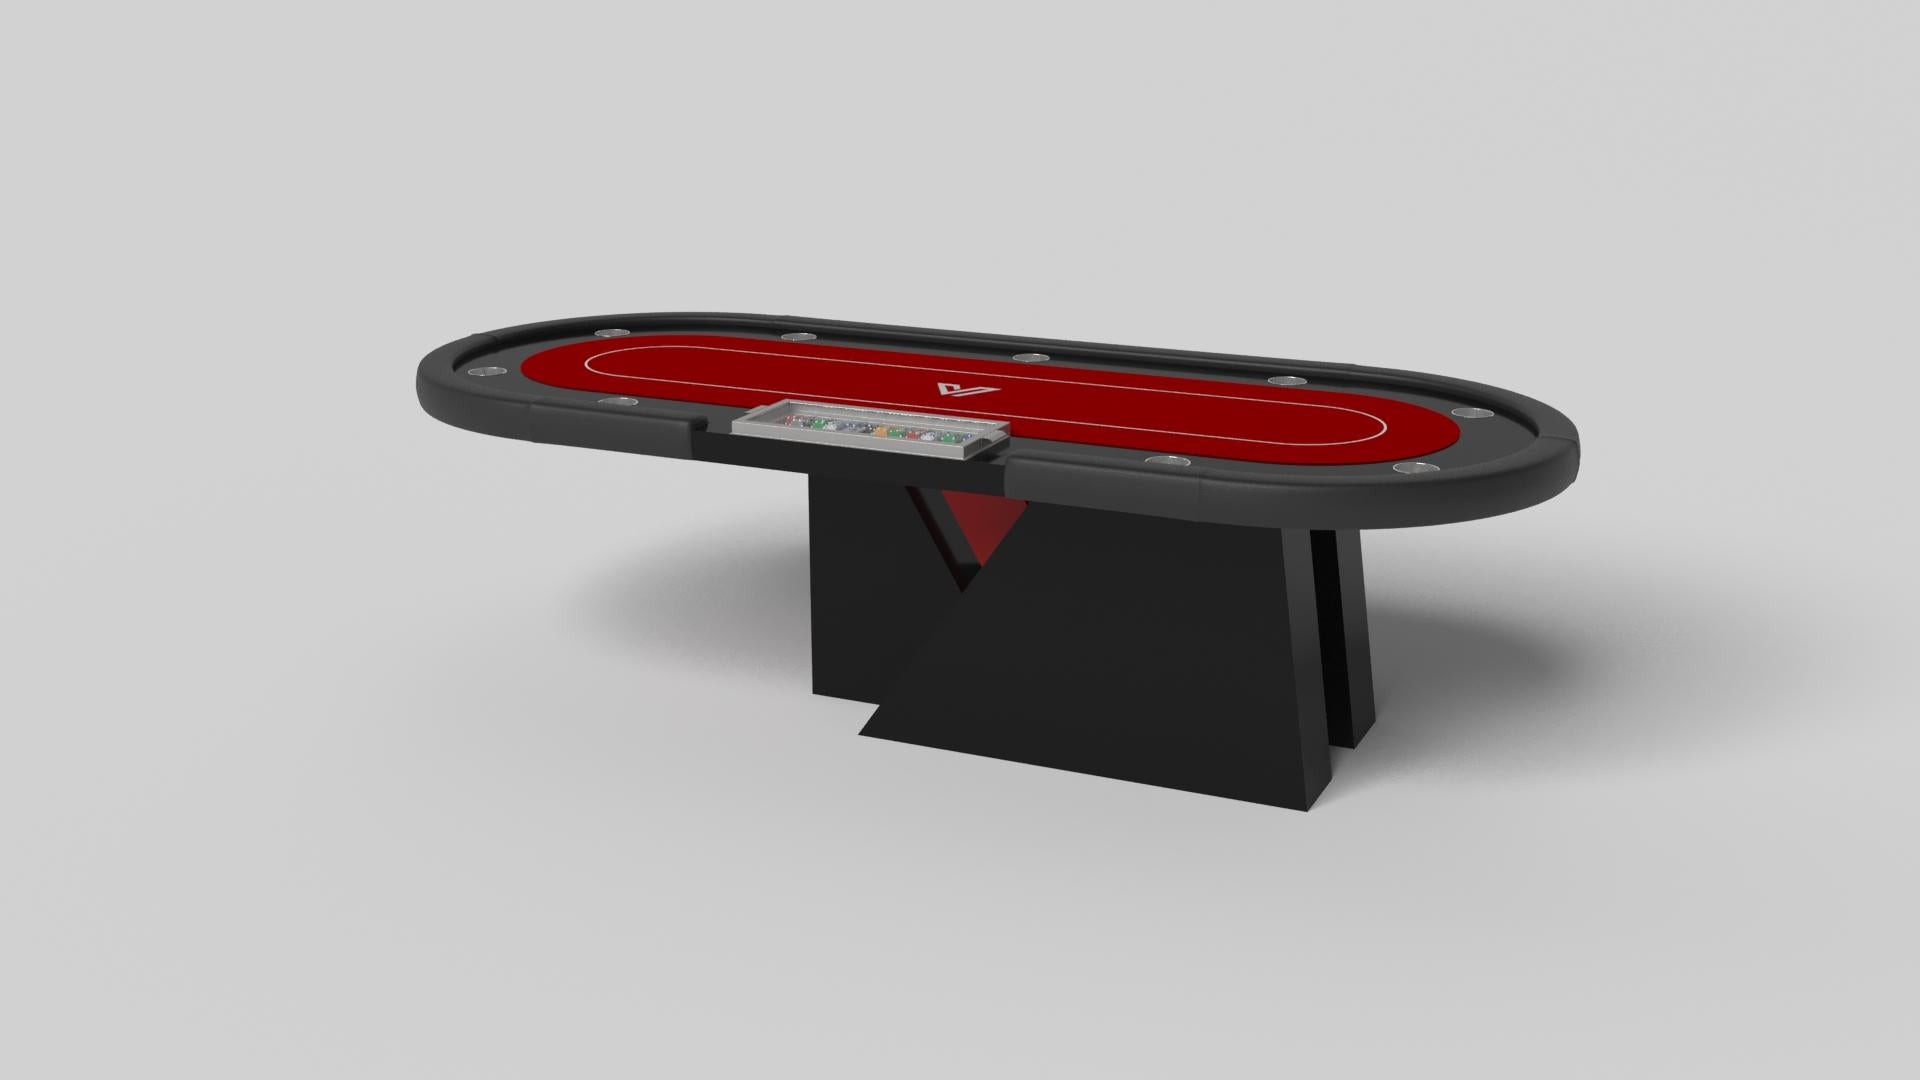 An asymmetric base creates a free-floating silhouette, making the Stilt poker table in chrome with walnut a compelling, contemporary addition to the modern home. Crafted from durable metal with solid walnut wood accents, this luxury handcrafted game